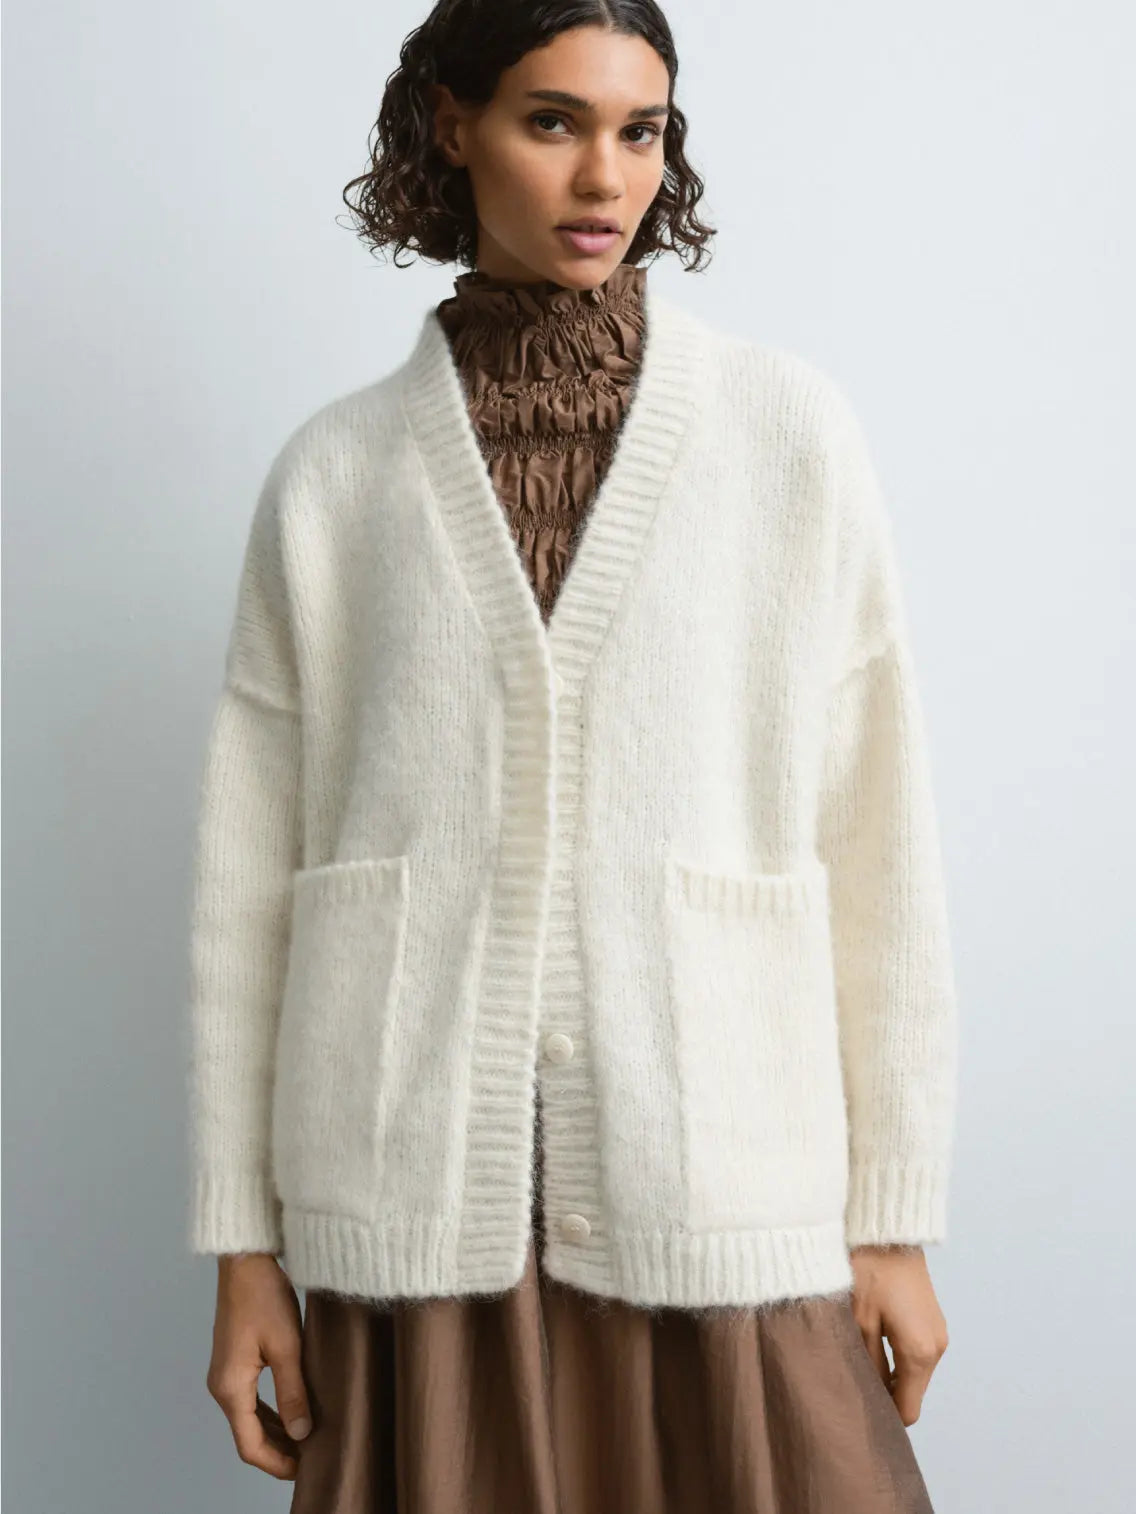 A cream-colored, long-sleeve Baby Alpaca Cardigan Natural displayed on a white background. It features a deep V-neck, front button closure, ribbed cuffs, two front pockets, and a relaxed fit. The label "Cordera" is visible on the inside neckline. Available exclusively at Bassalstore in Barcelona.